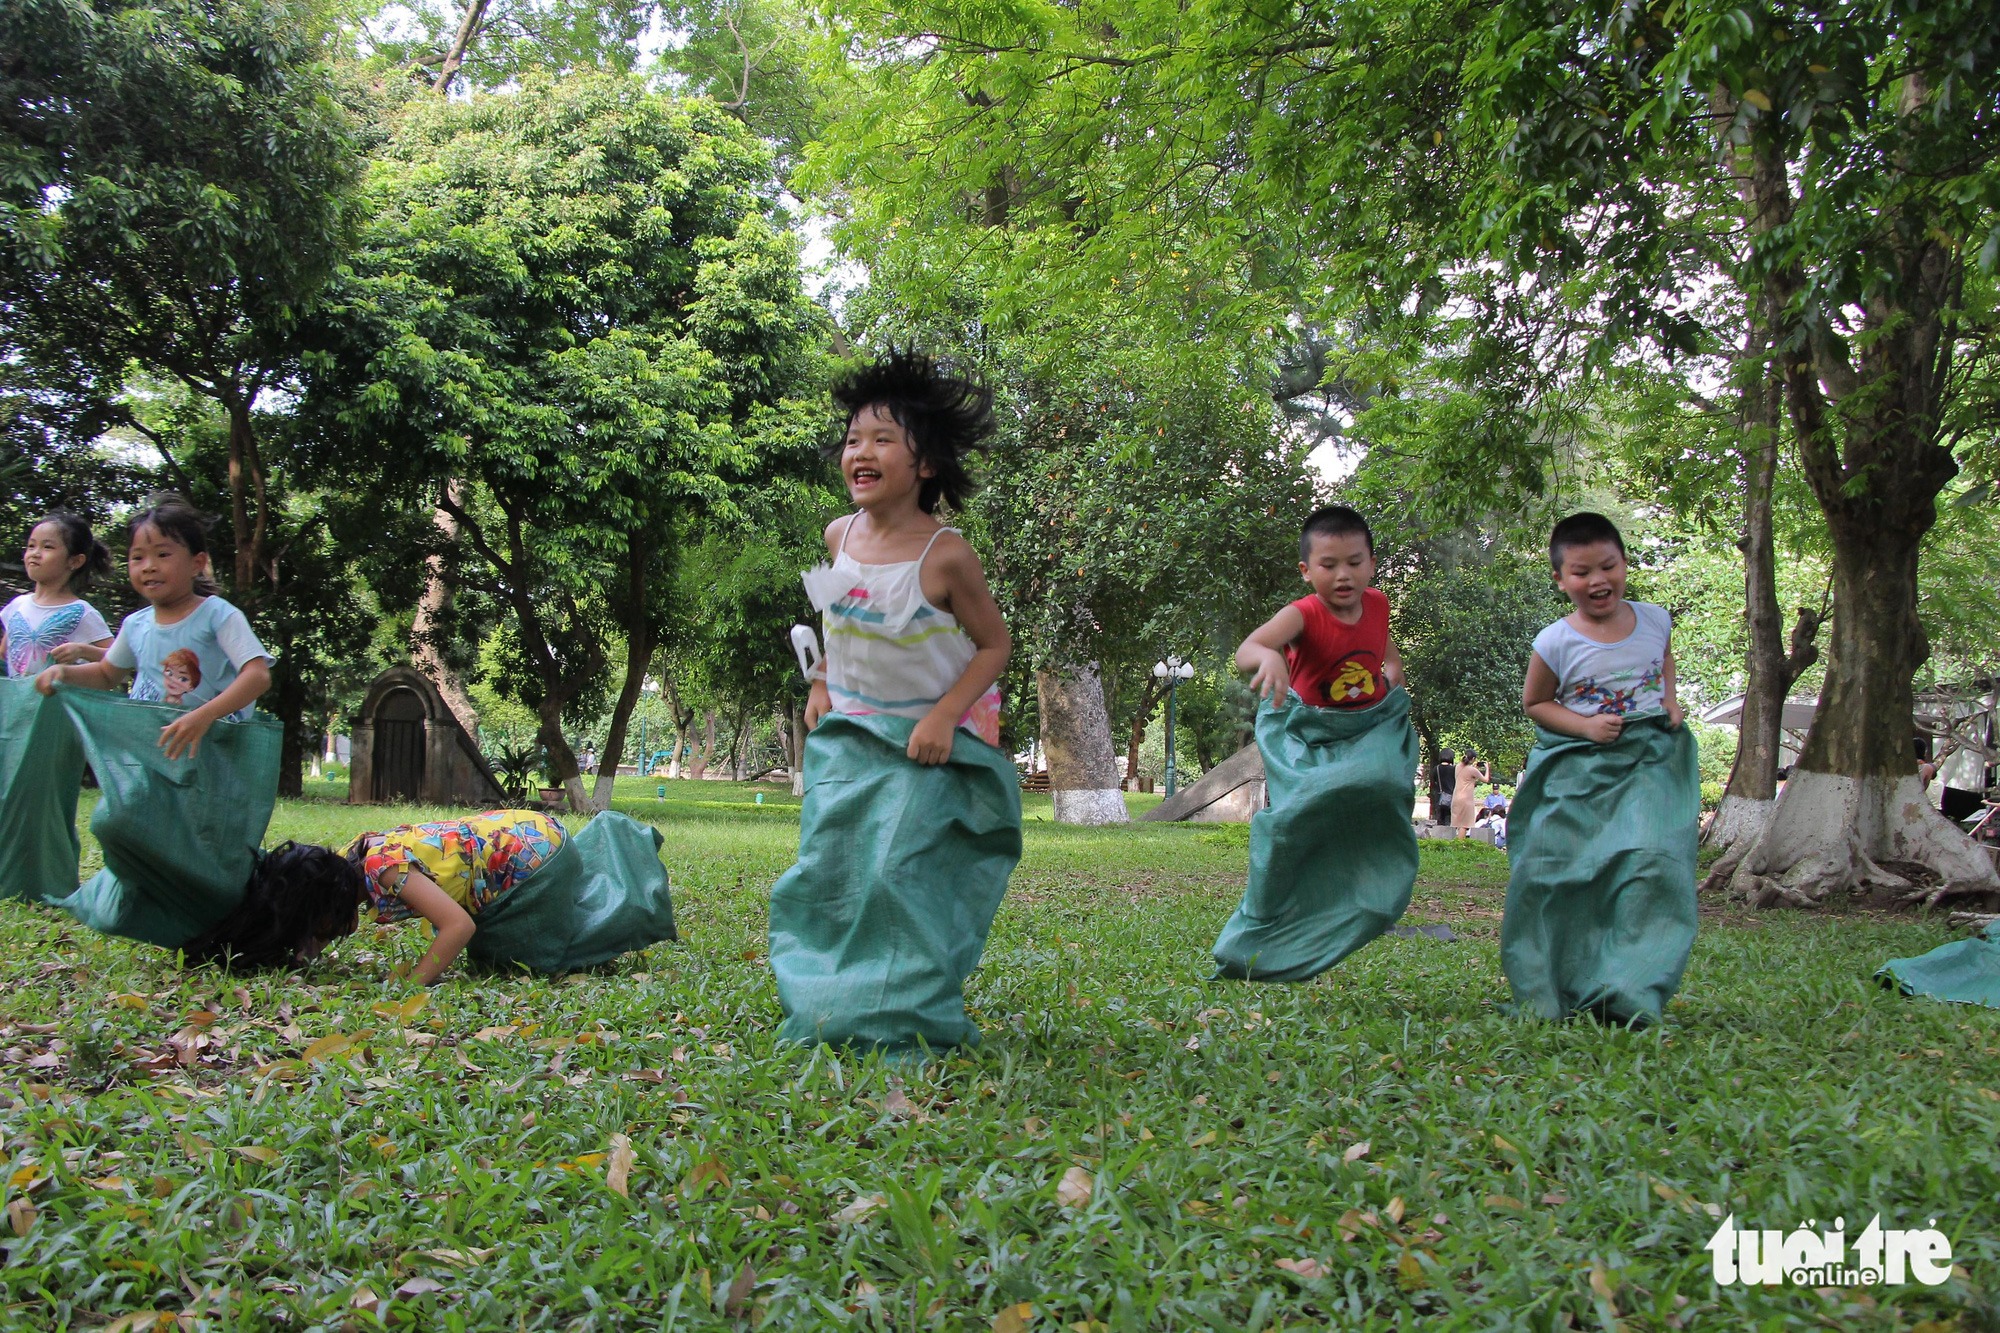 Children’s innocent happiness in Hanoi’s ‘kingdom of recycled materials’